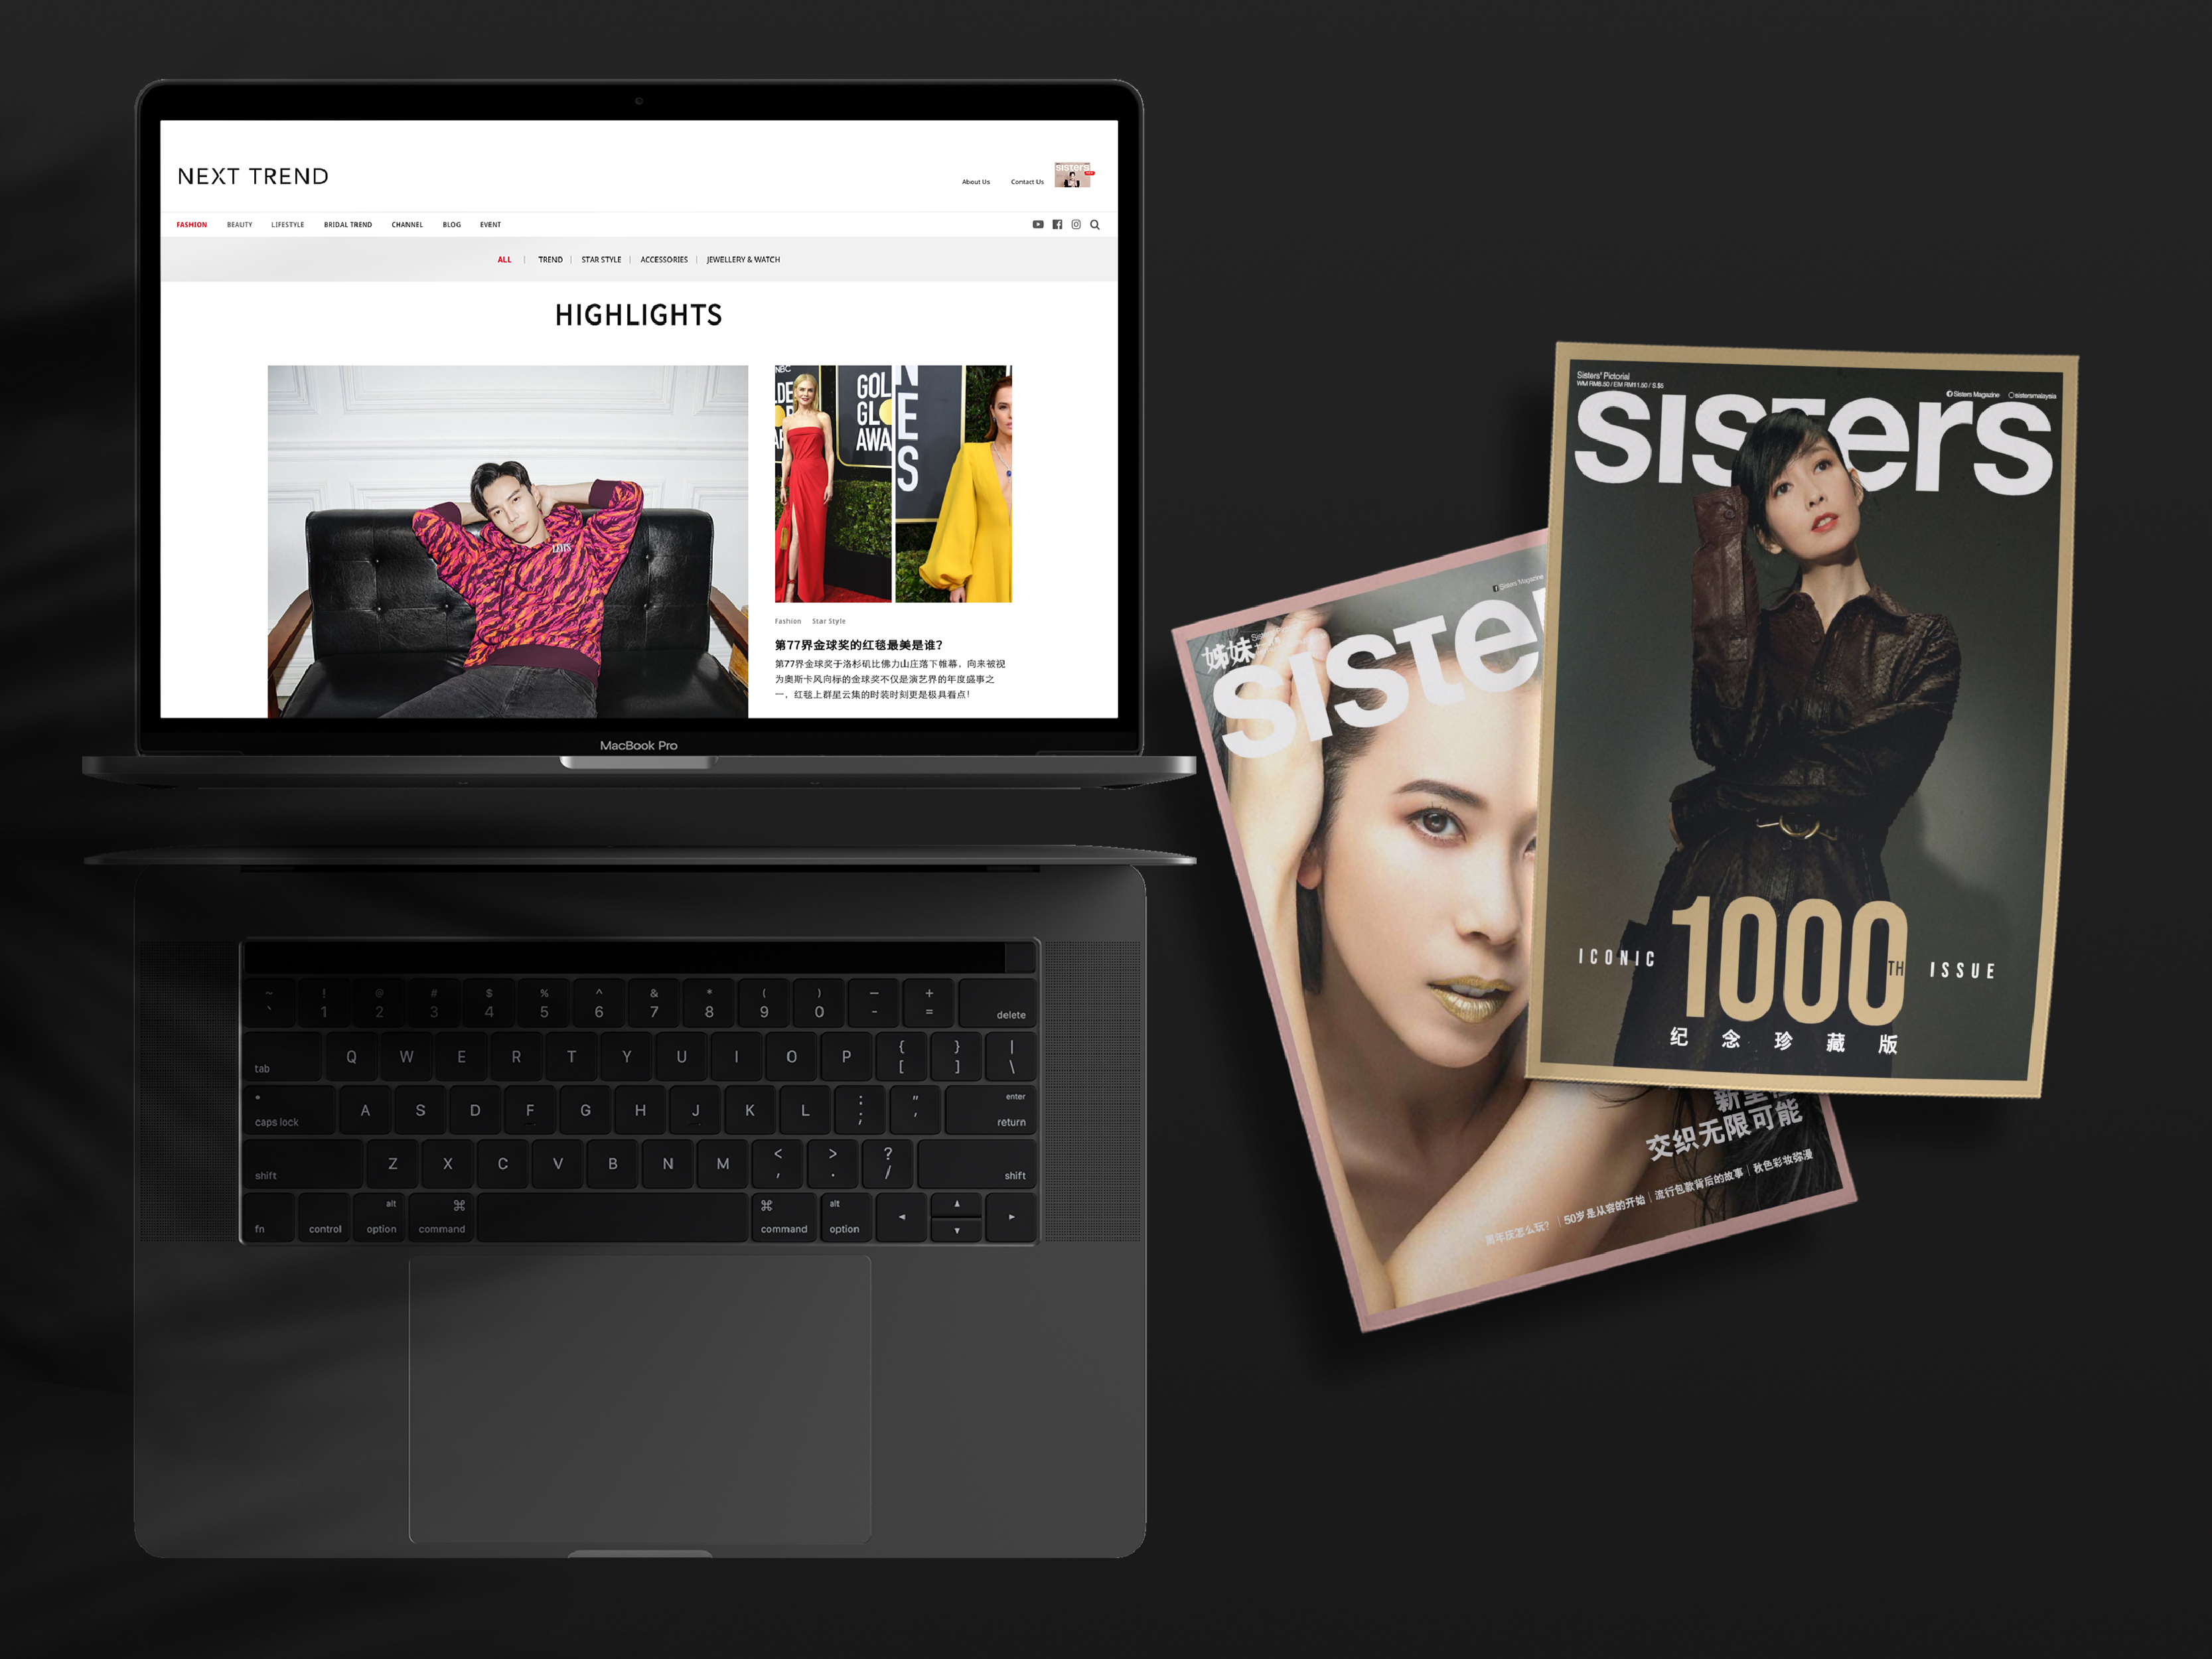 Website landing page design for Next Trend Publication with accompanying Sisters Magazine issues.